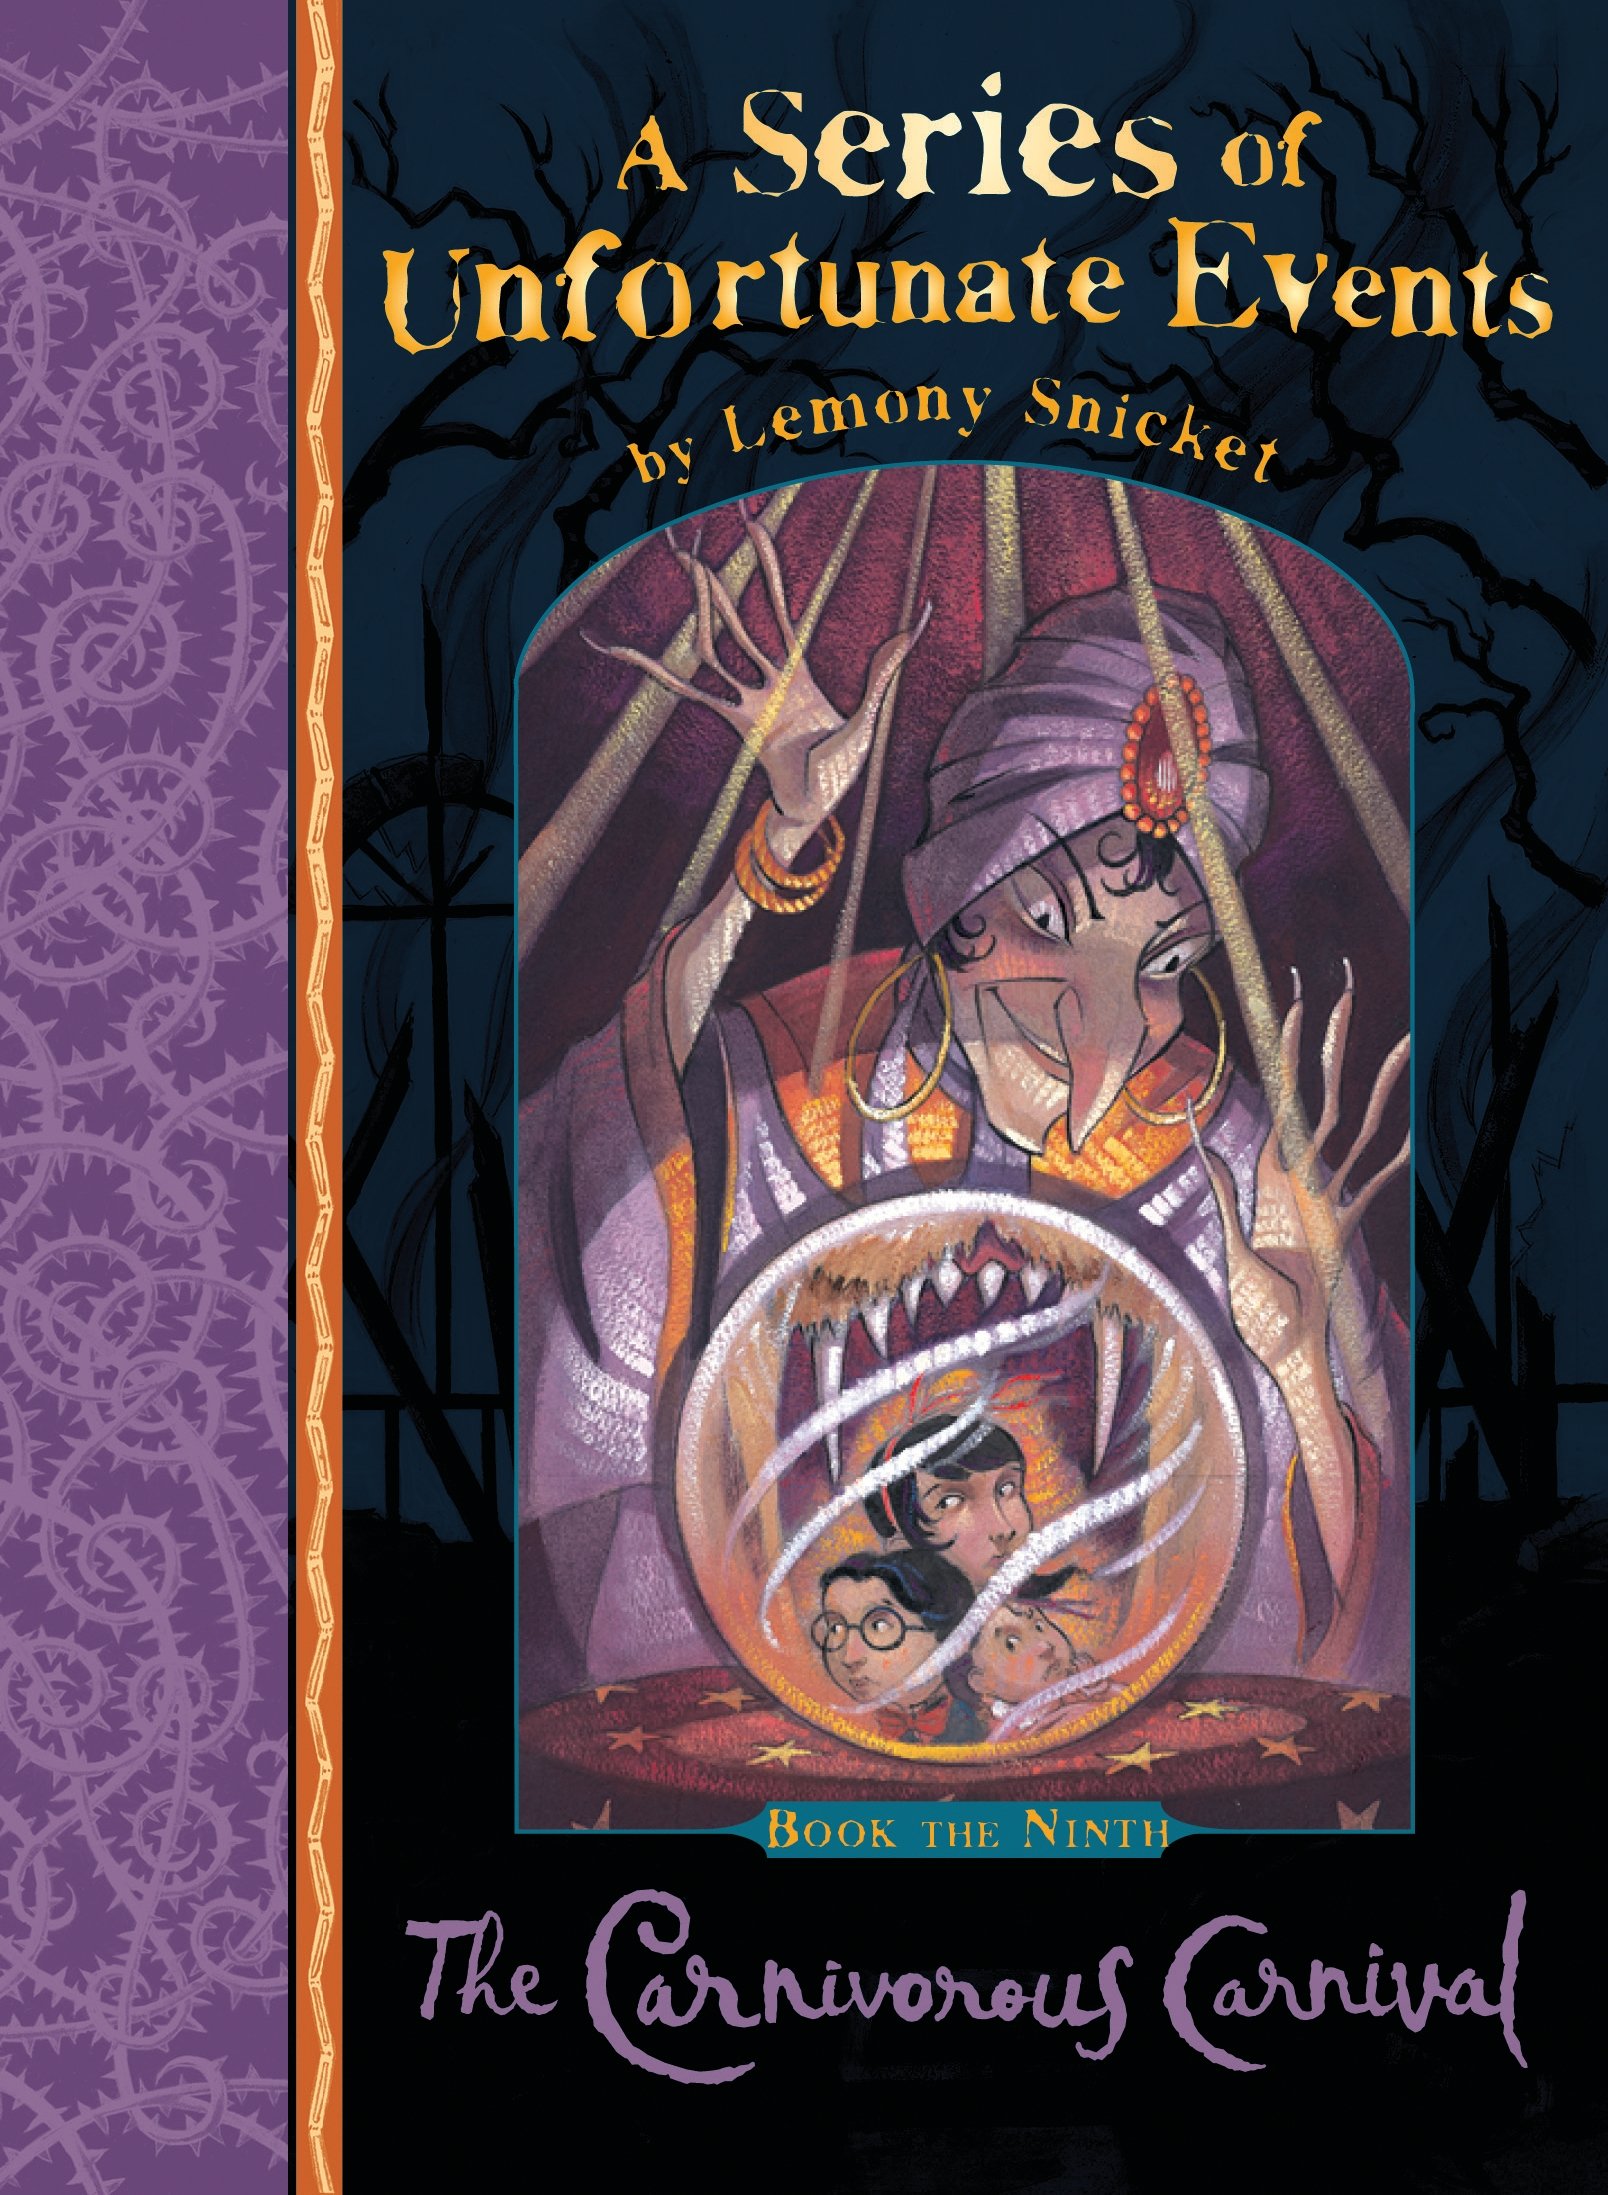 A Series of Unfortunate Events - The Carnivorous Carnival